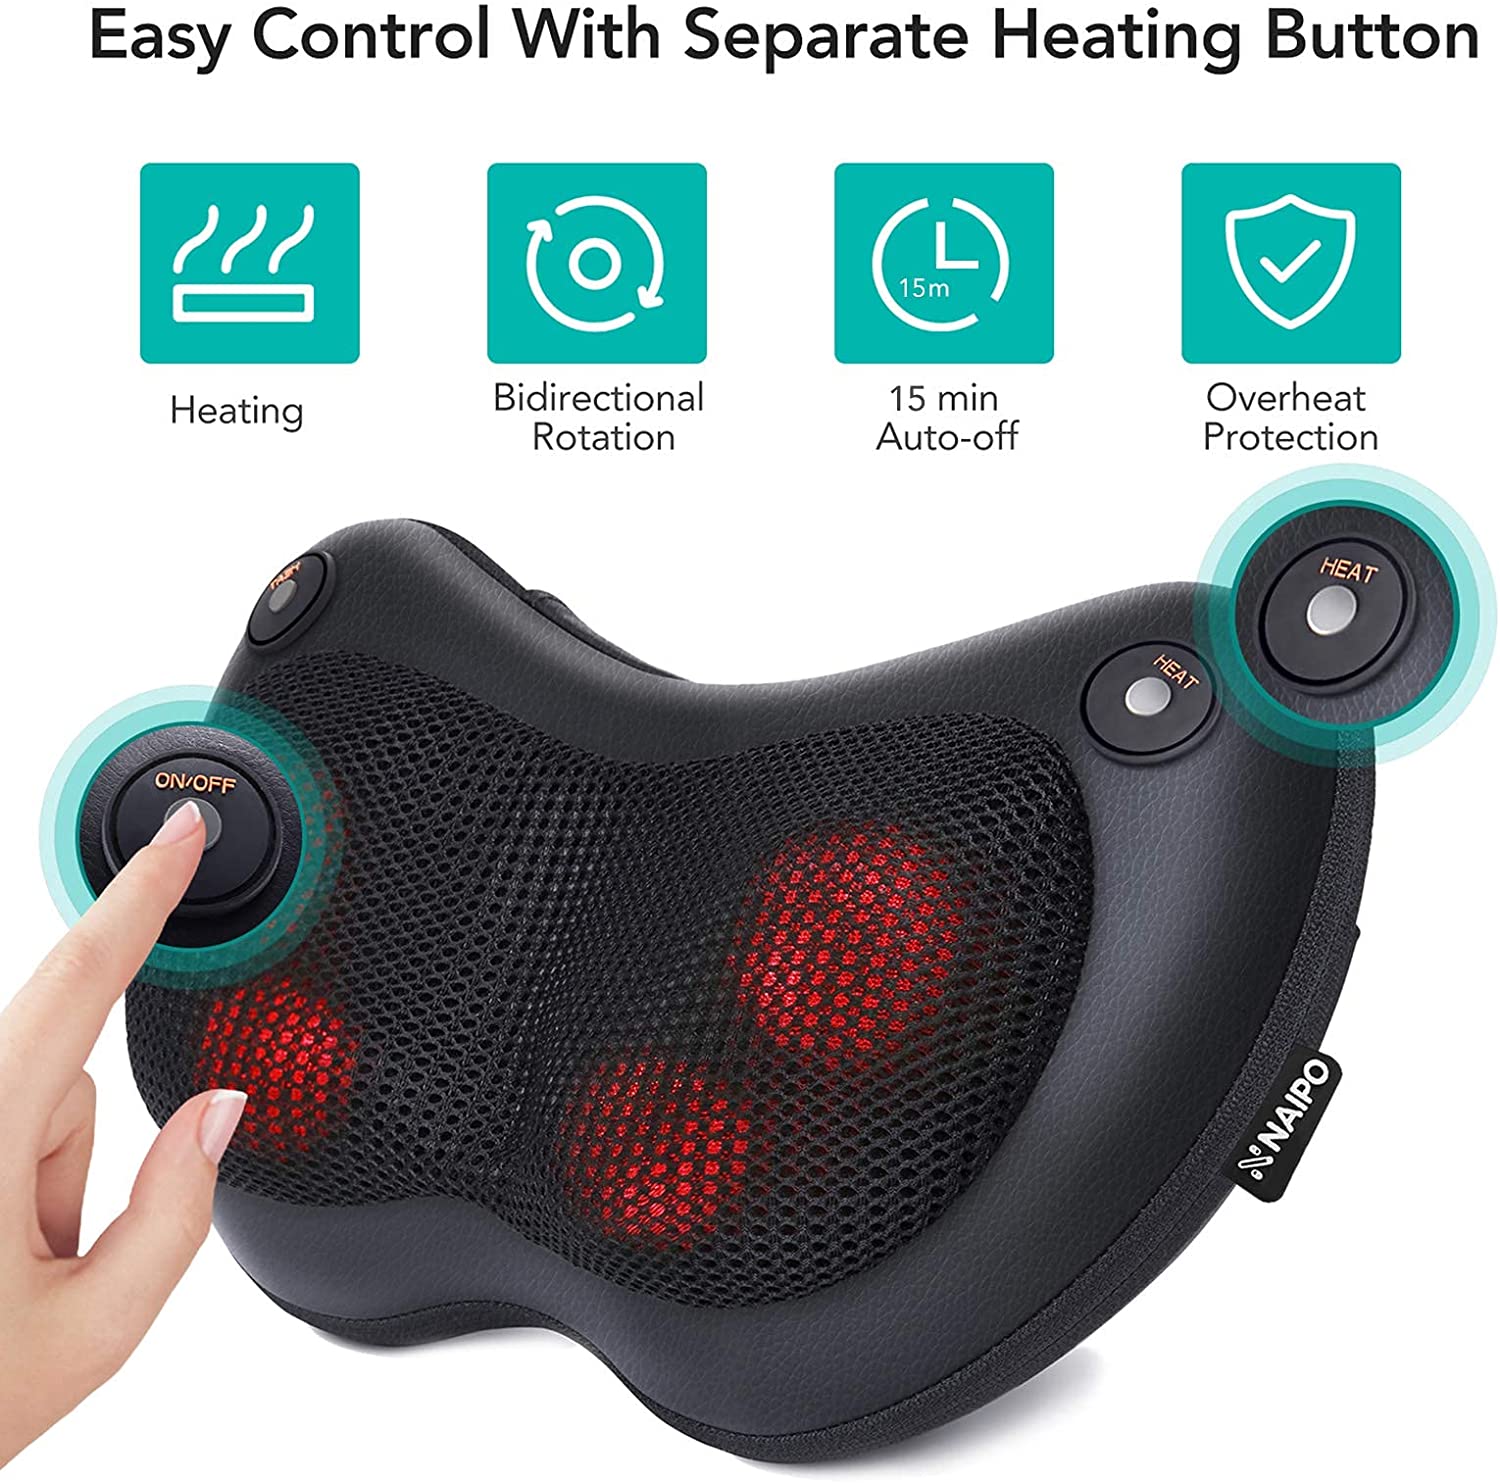 Load image into Gallery viewer, Shiatsu Neck Back Massager Massage Pillow with Heat, Deep Tissue Kneading Massager for Shoulder, Lower Back, Leg, Foot, Muscle Pain Relief, Best Relaxation Gifts in Home Office and Car
